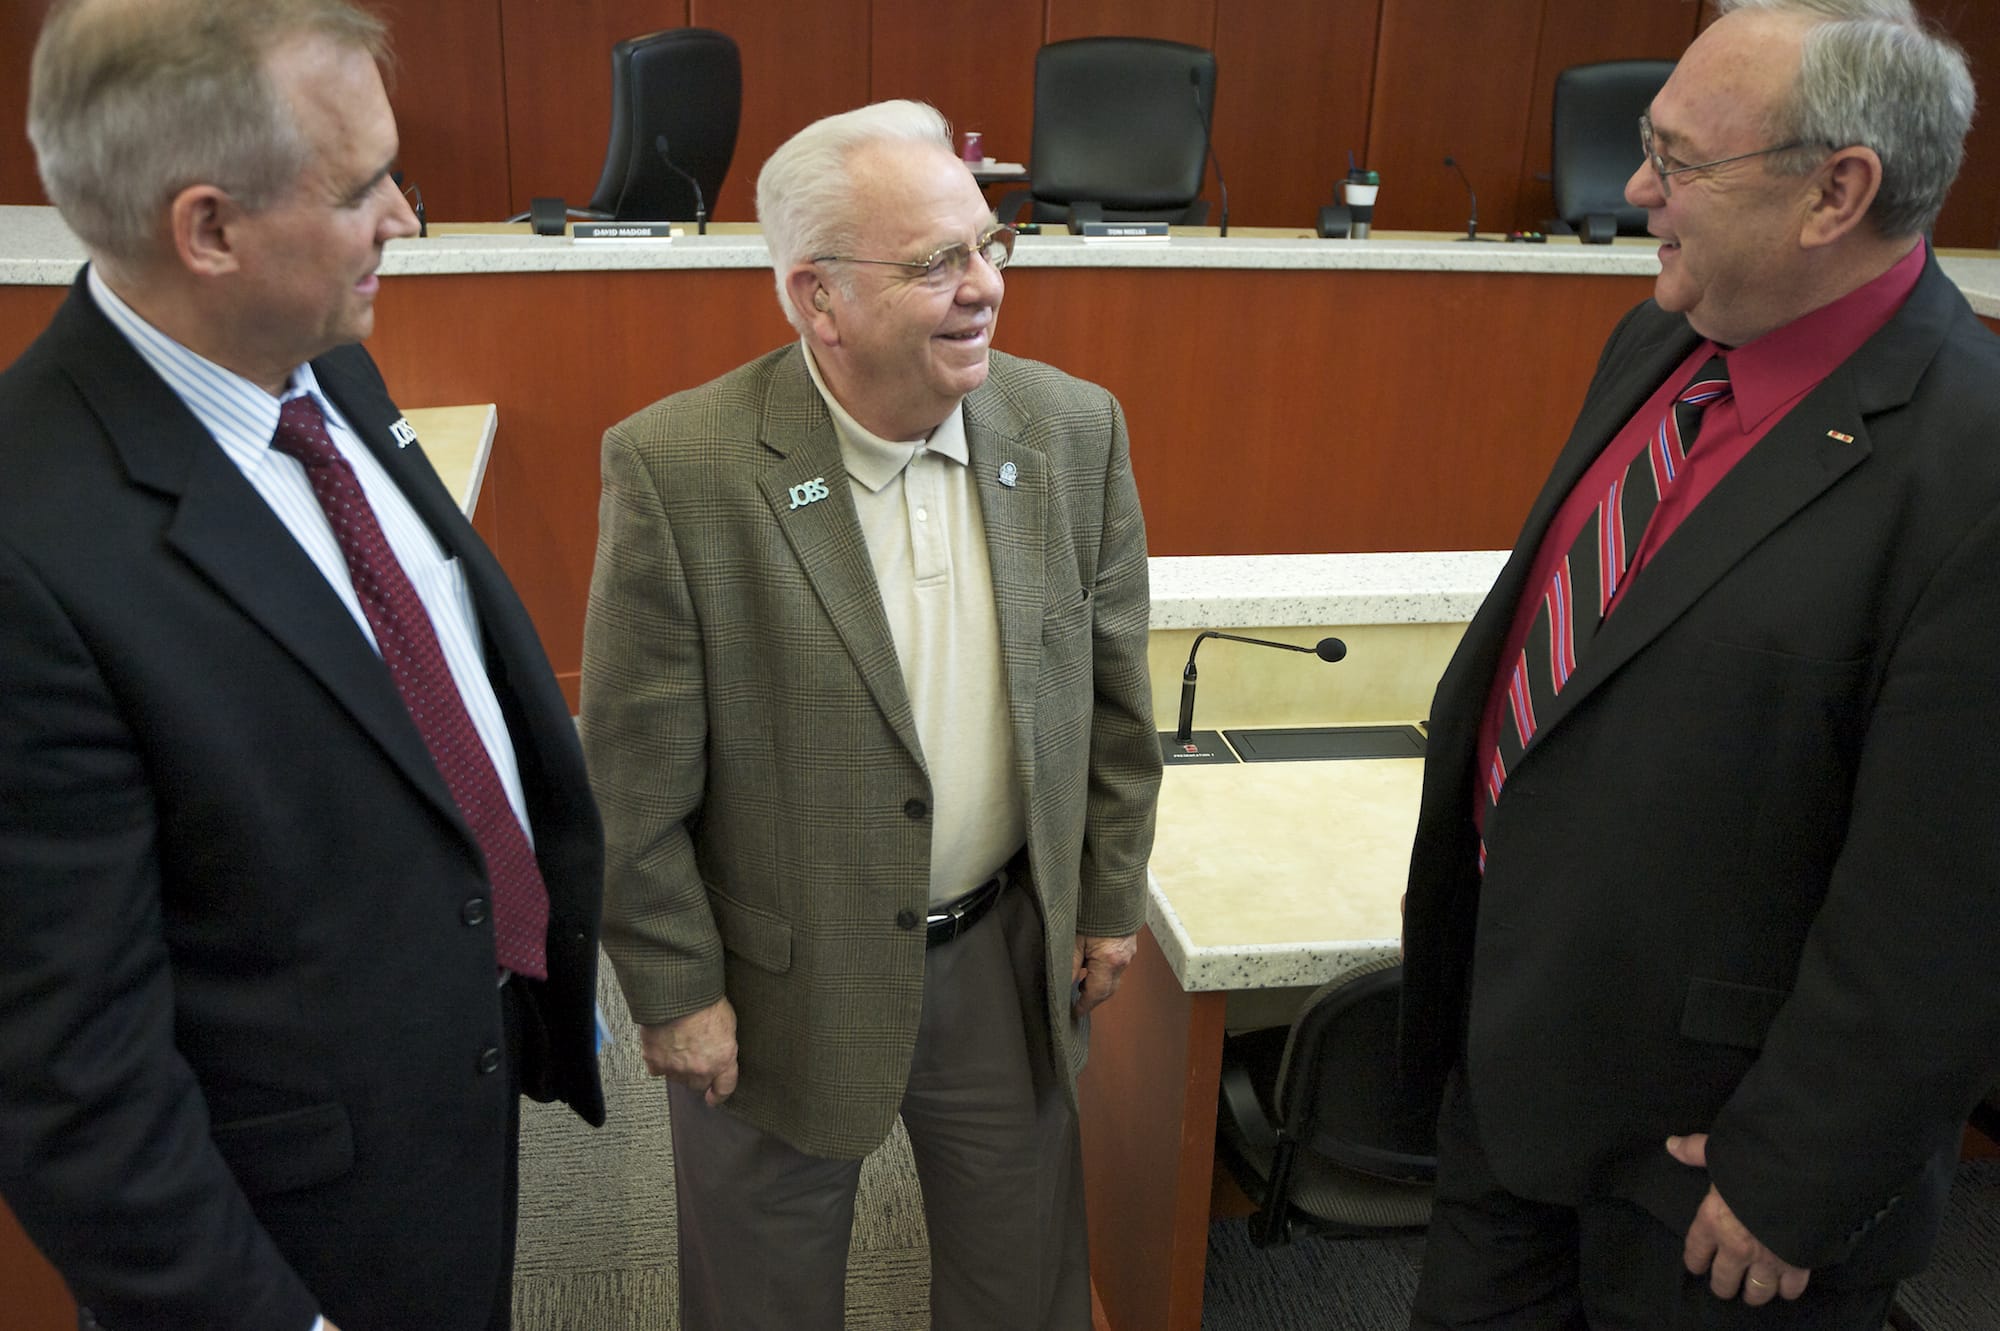 Clark County Commissioners  David Madore, left, and Tom Mielke, right, talk to Ed Barnes, on Tuesday June 3, 2014, after appointing him to fill the seat on the board that was vacated by Steve Stuart earlier this year.